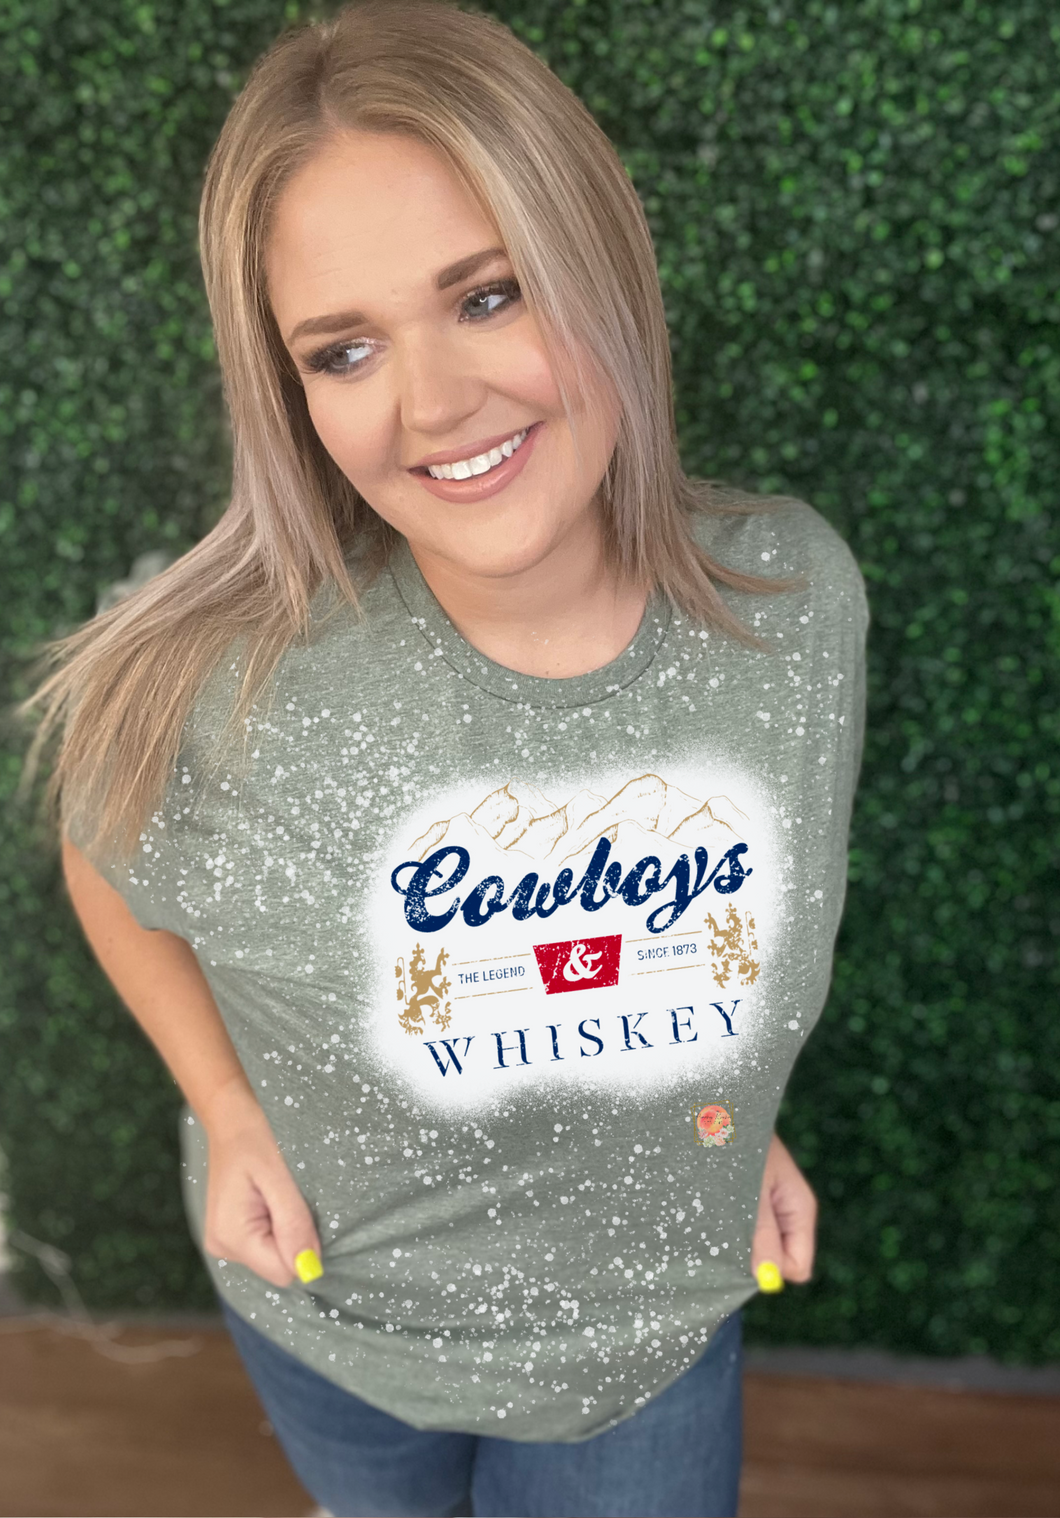 Cowboys and whiskey